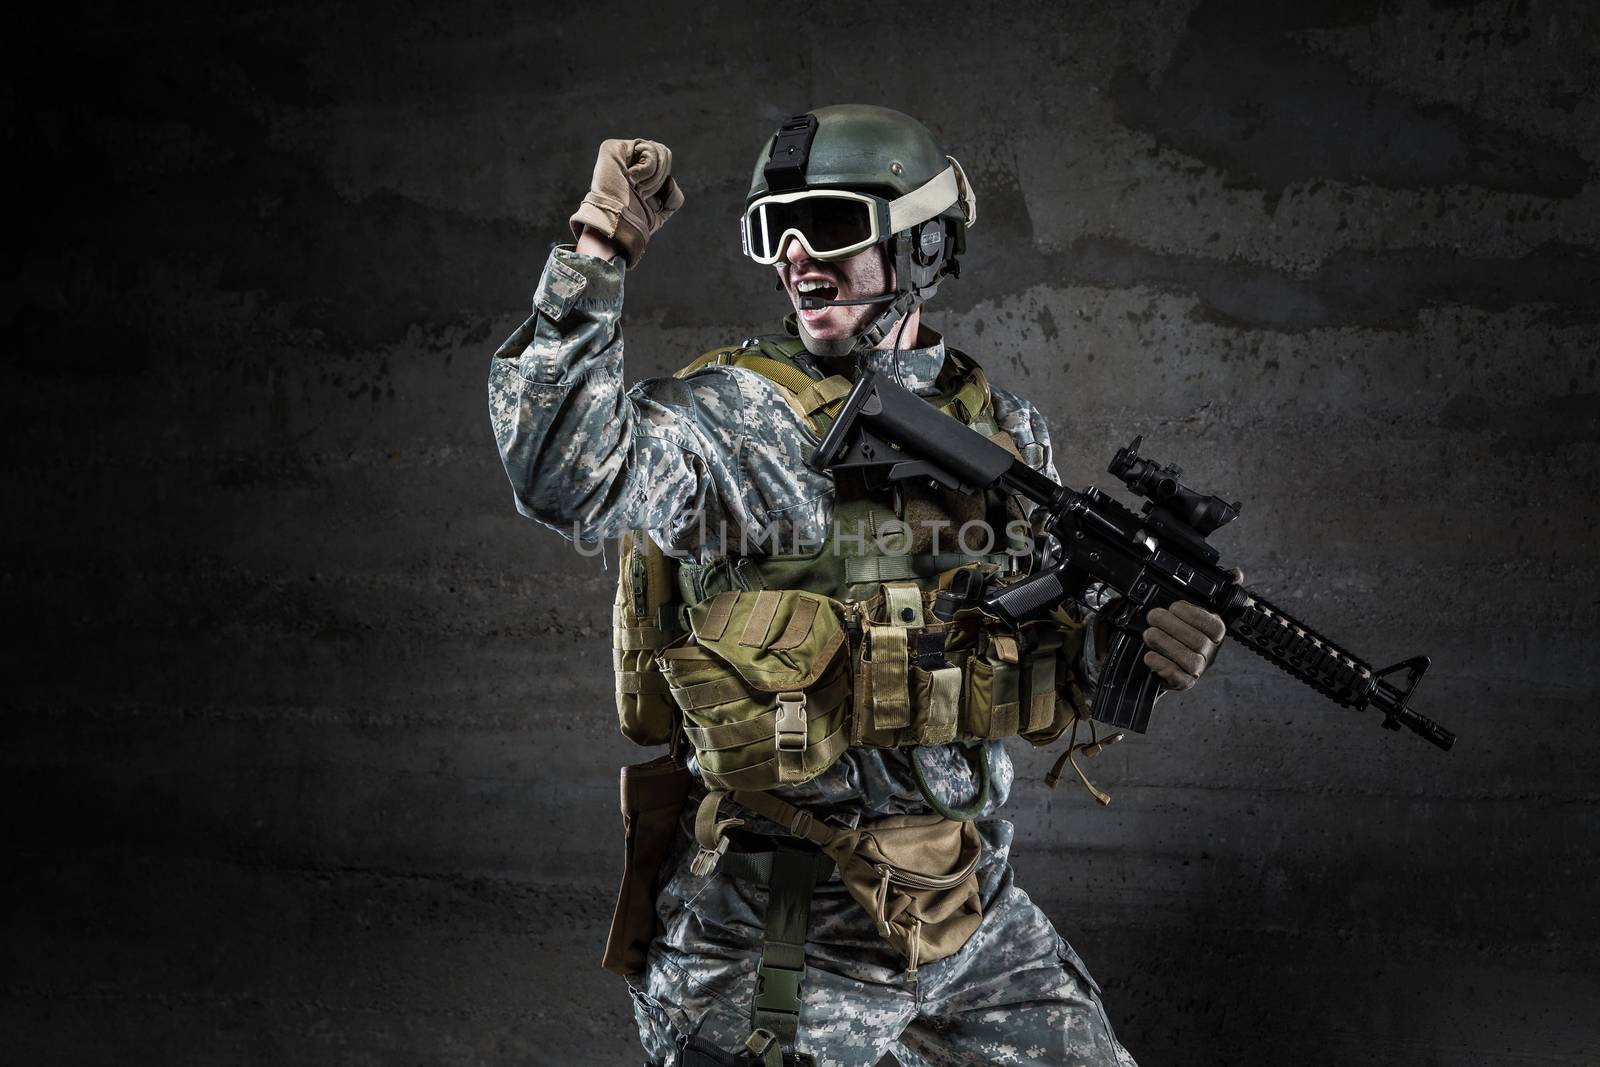 American Soldier shouting on dark background by alessandroguerriero